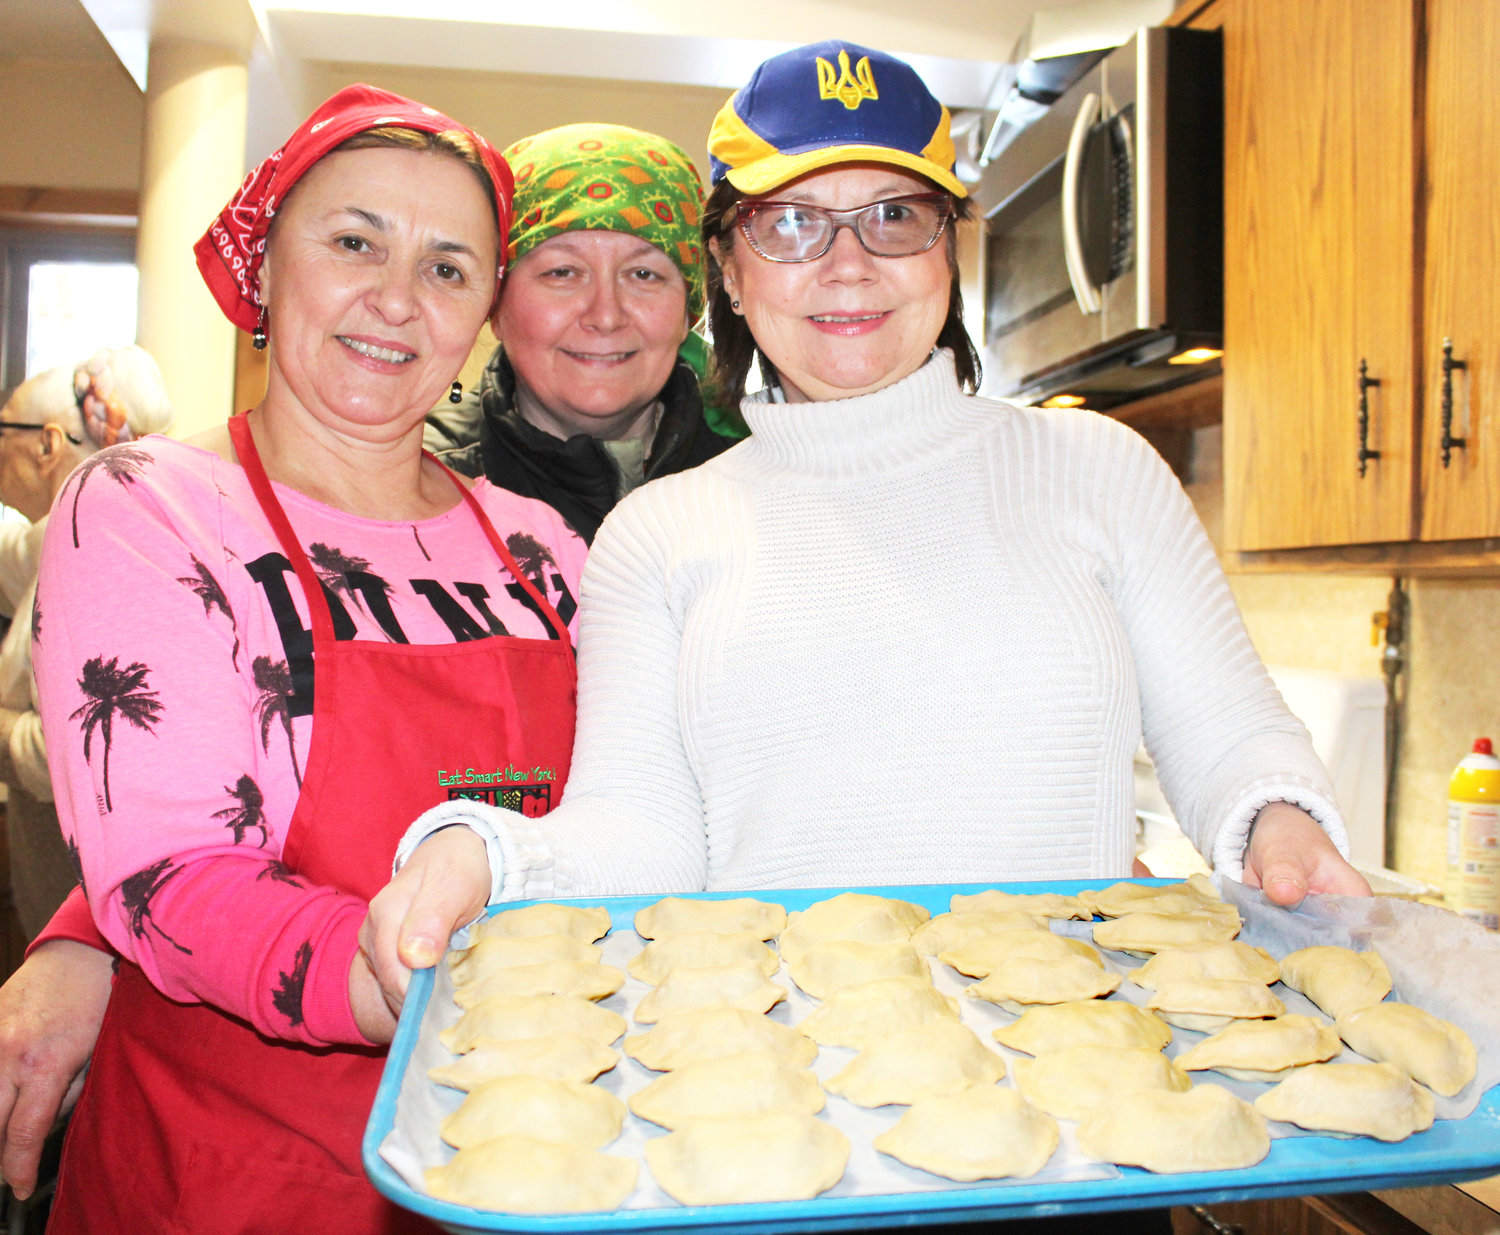 Irina Malyuk, Maria Nakonczna and Lubo Nakonechna carry one of the last trays of pierogi from the assembly area into the kitchen. A good time was had by all.